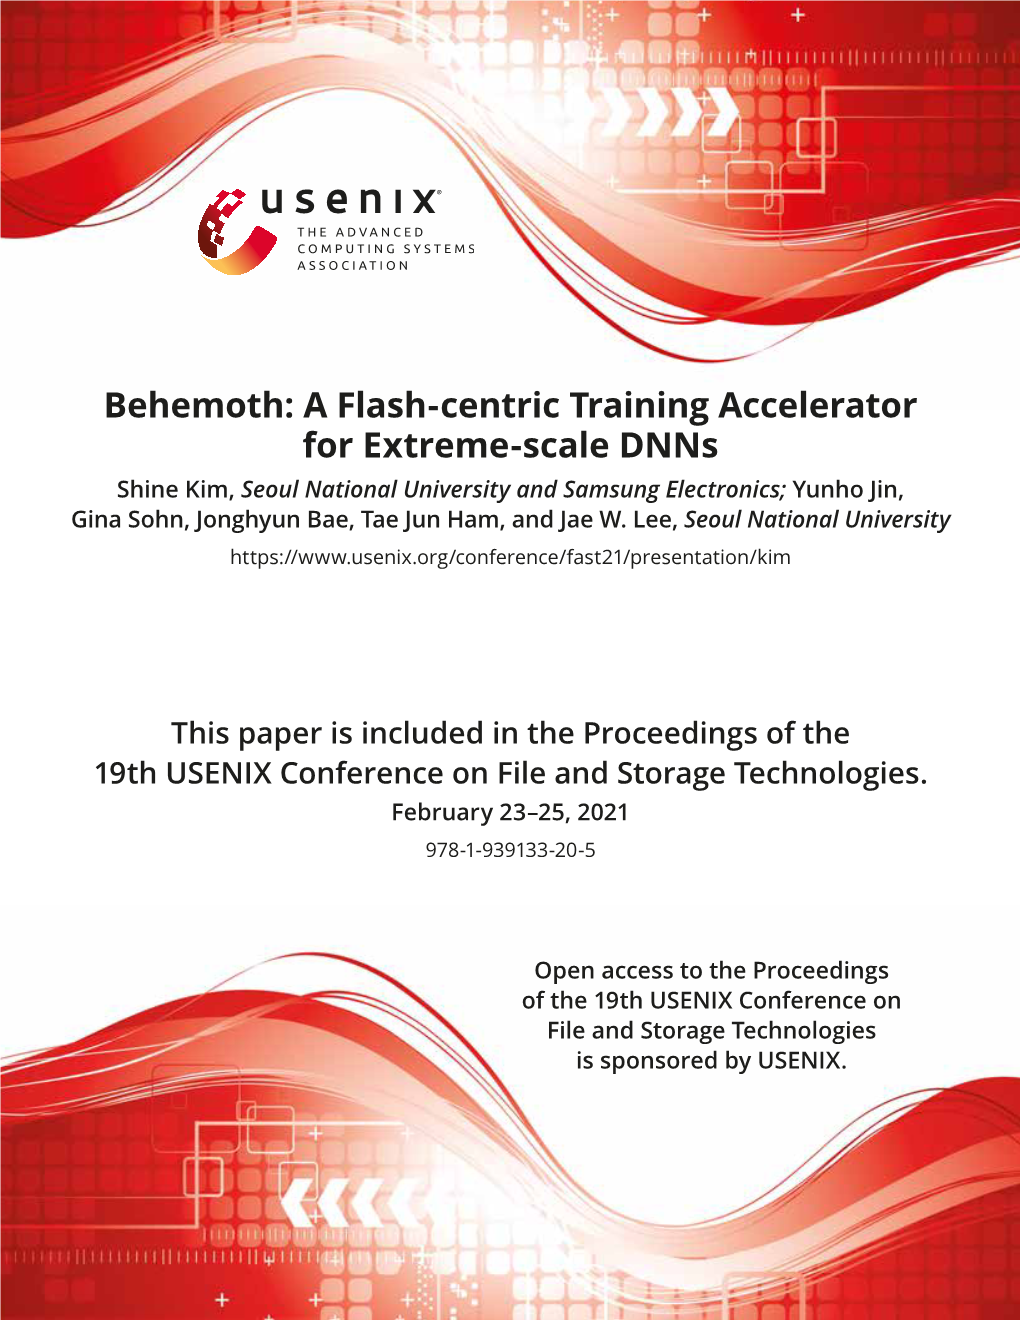 Behemoth: a Flash-Centric Training Accelerator for Extreme-Scale Dnns